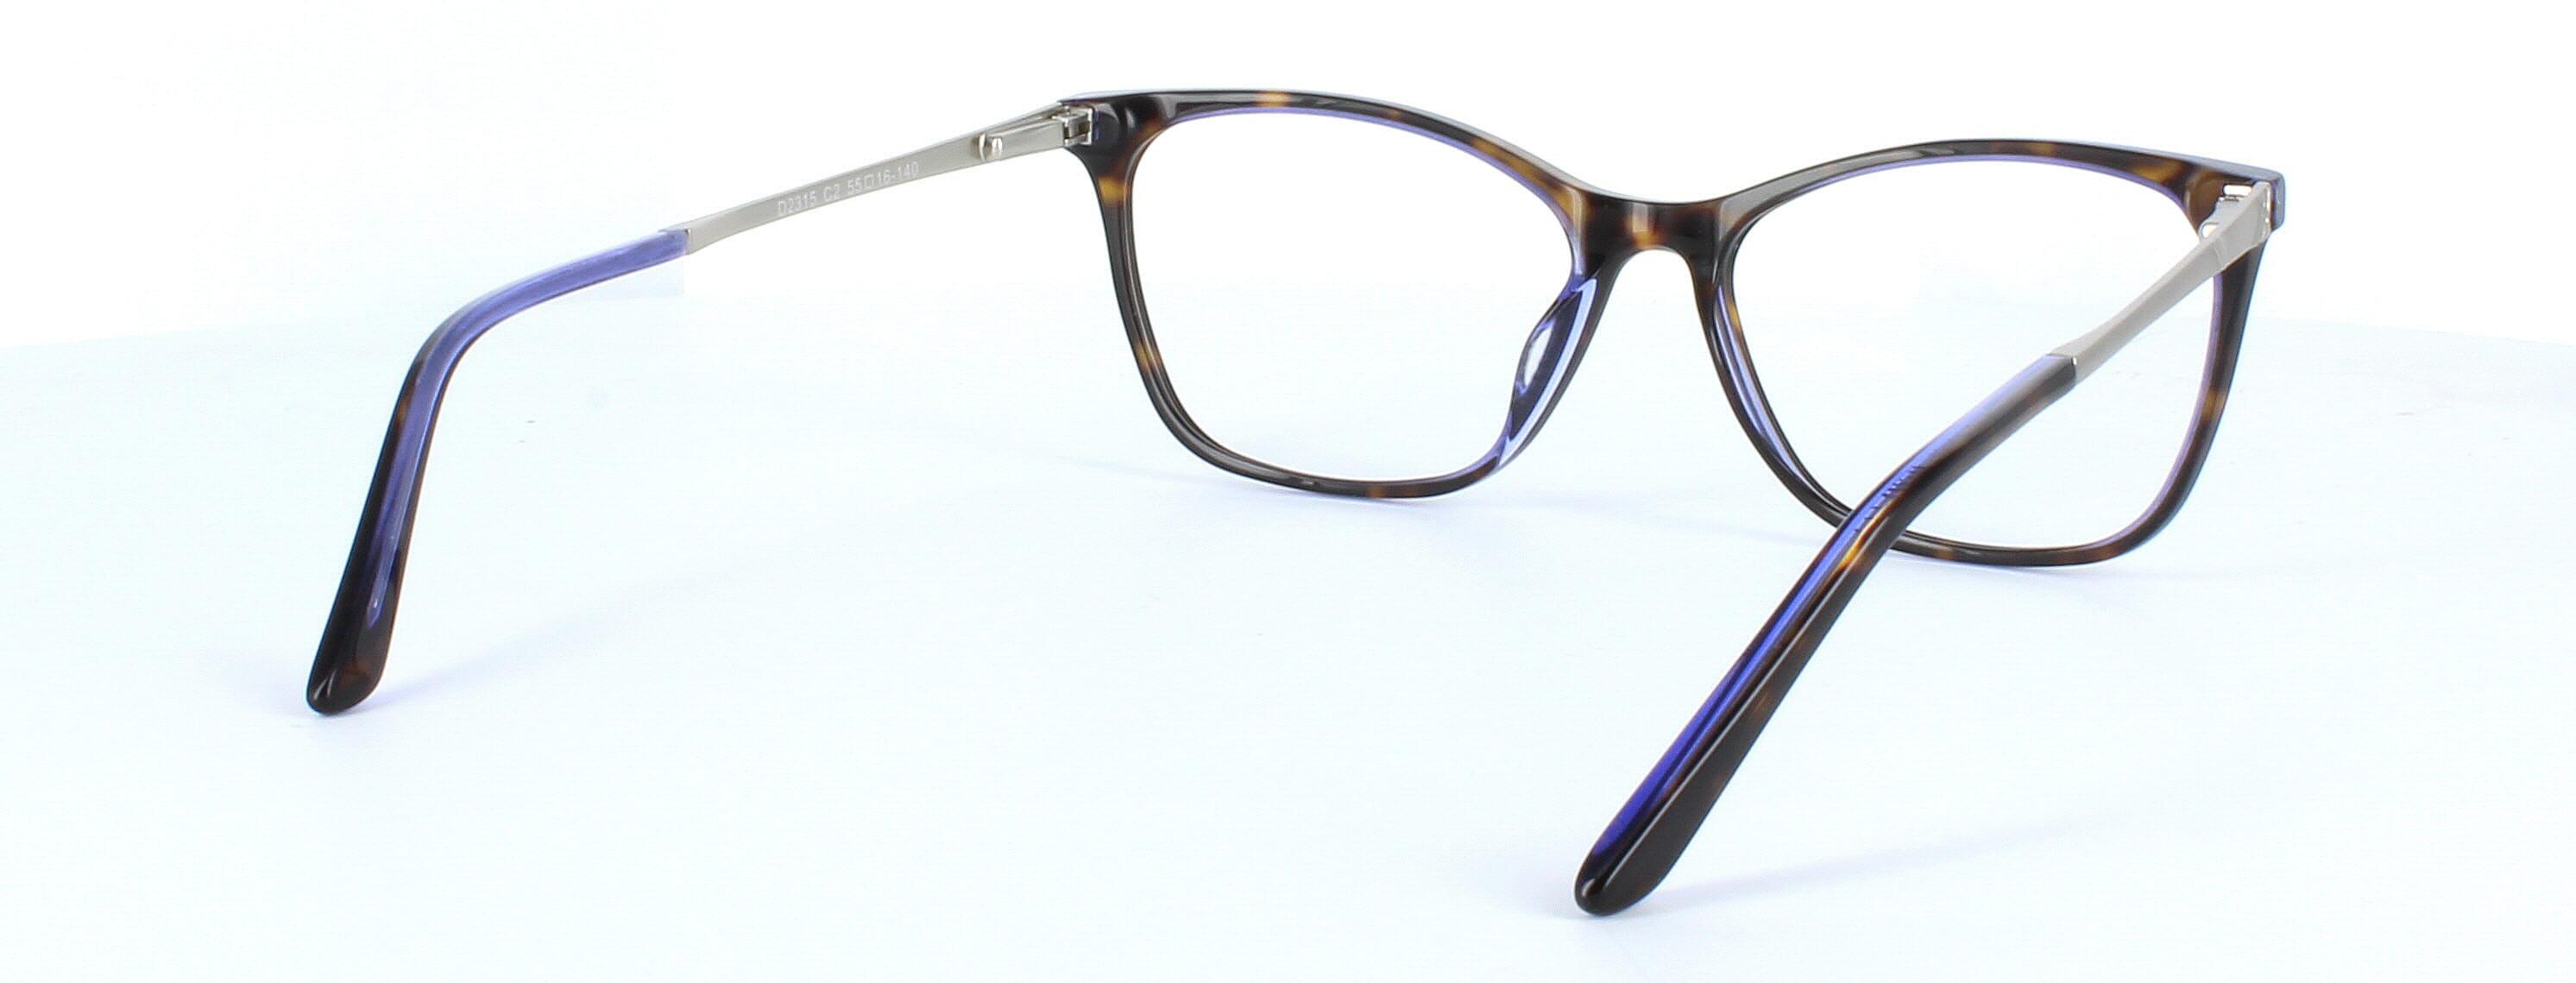 Bellina - ladies acetate glasses here in tortoise with crystal purple reverse - image view 4